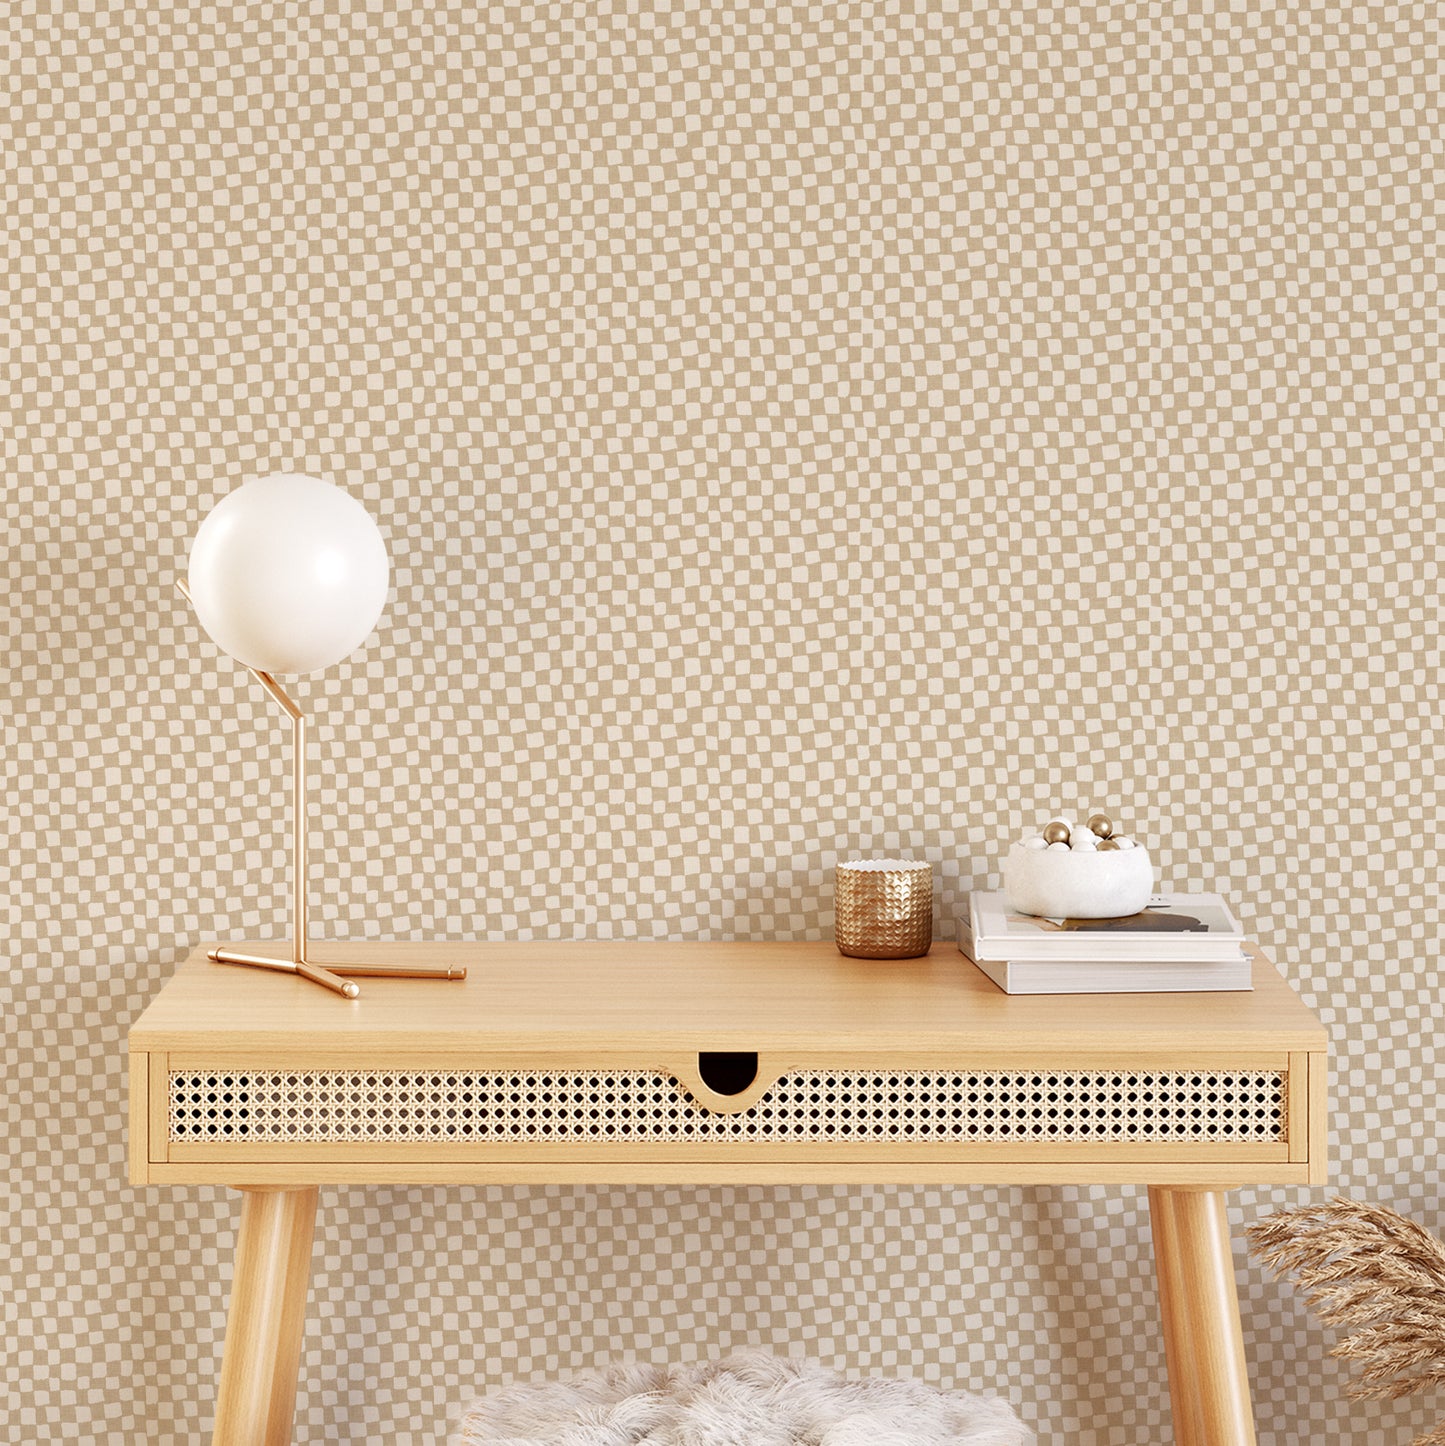 Transform your space with Lazy Checkers Wallpaper – Tan. Featuring playful, uneven visuals for a dynamic, three-dimensional look, this wallpaper can bring a sense of movement and energy to any room.